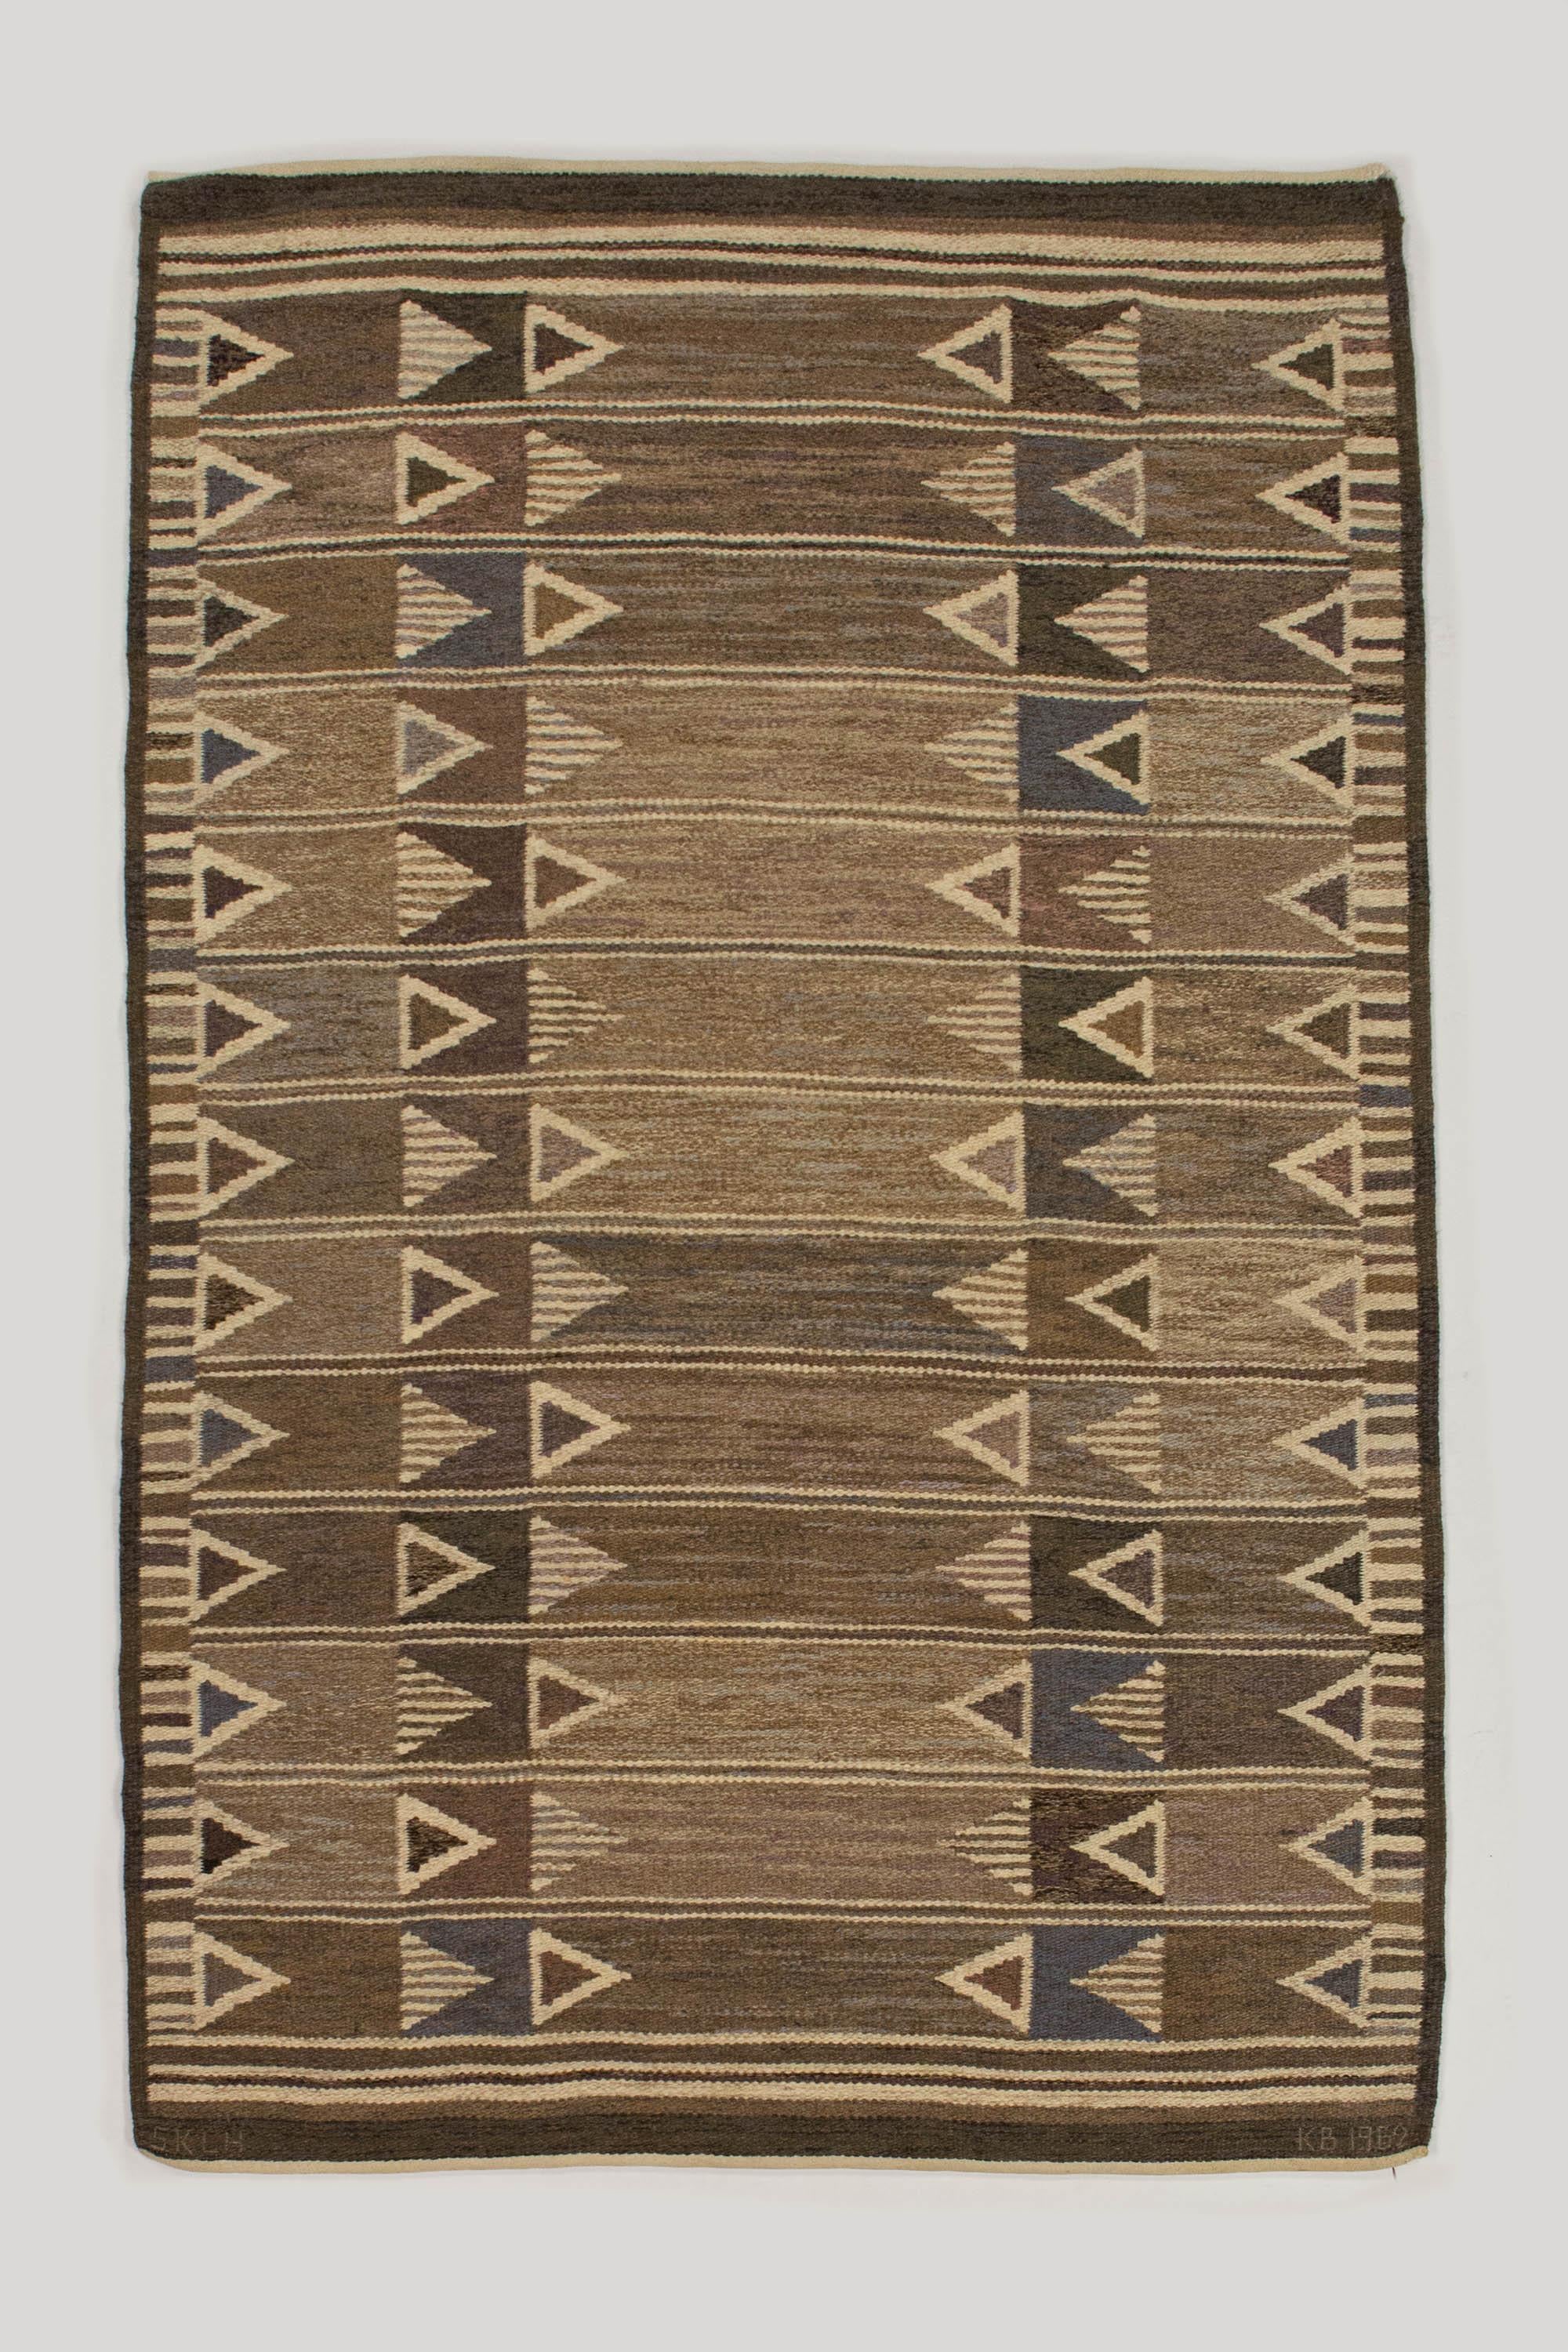 Kerstin Butler Swedish Rug by Södra Kalmar Läns Hemslöjd - Signed KB, 1962, SKLH

This early hand woven, signed KB, and dated 1962 piece was designed by the much sought after Kerstin Bulter during her time with Södra Kalmar Läns Hemslöjd is an an